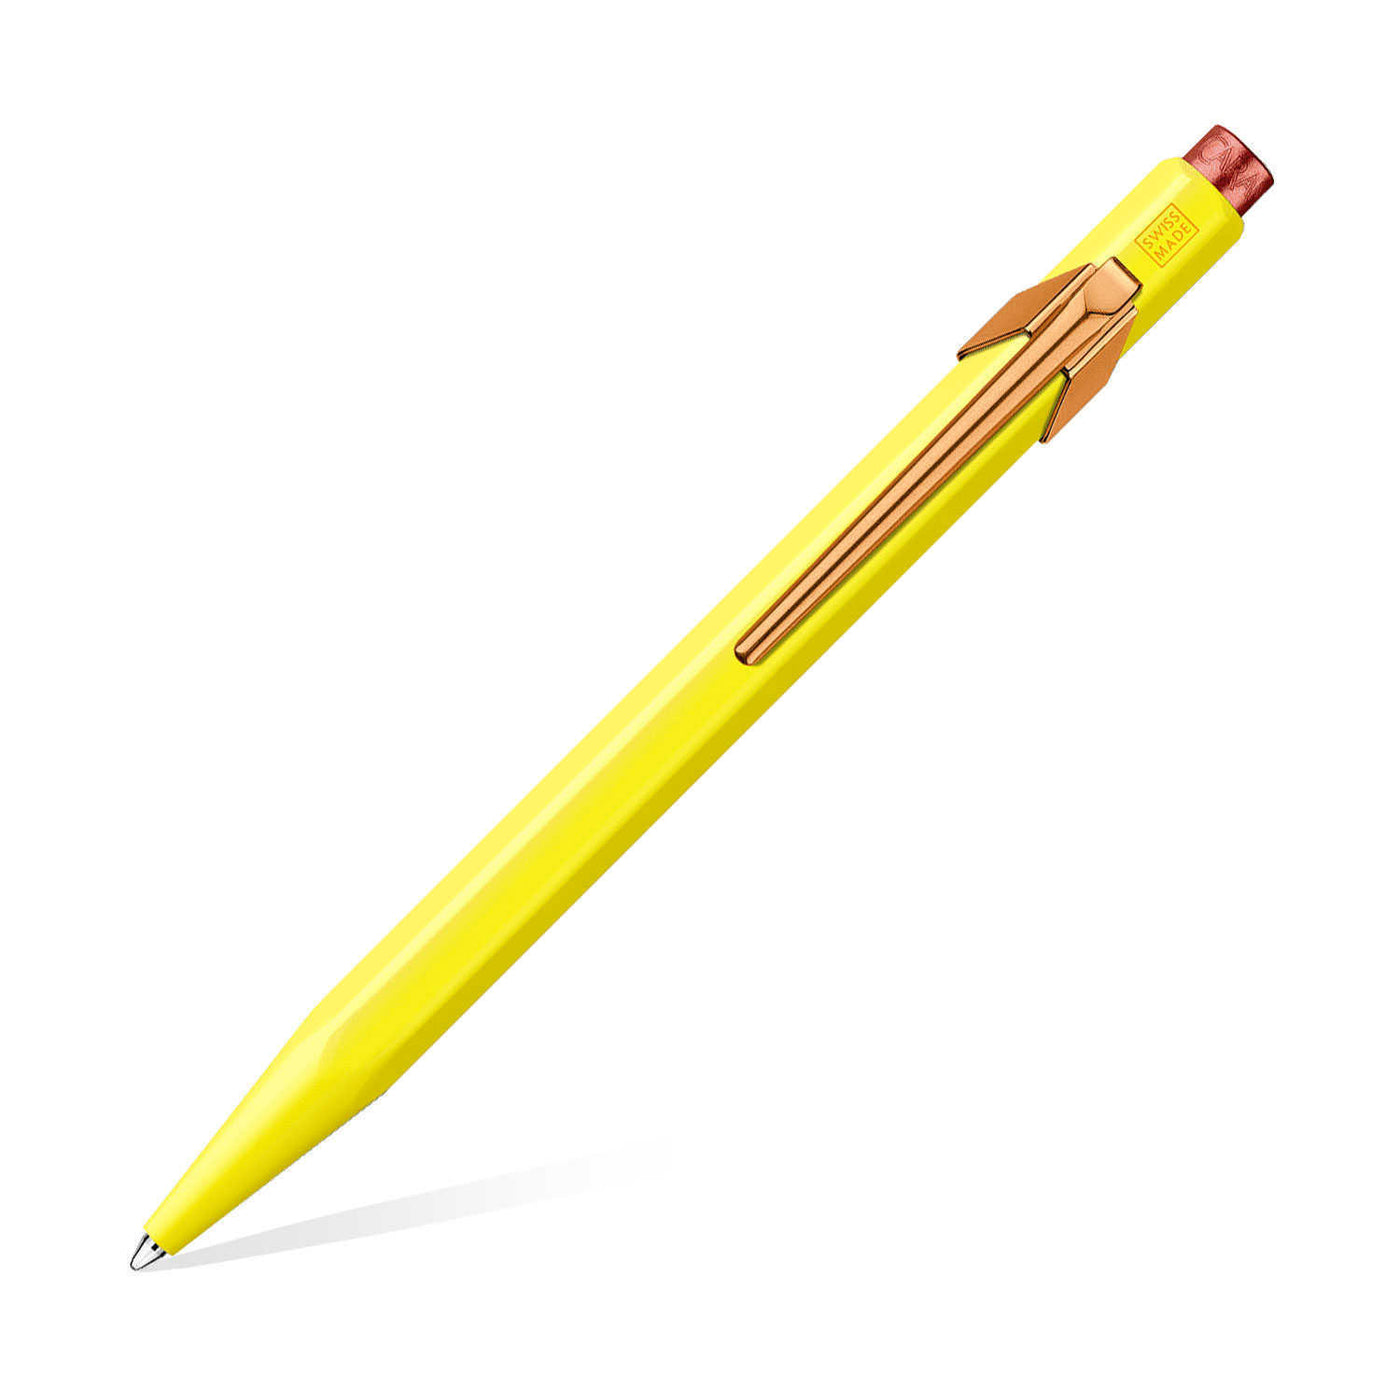 Caran d'Ache 849 Claim Your Style Ball Pen - Canary Yellow (Limited Edition) 1